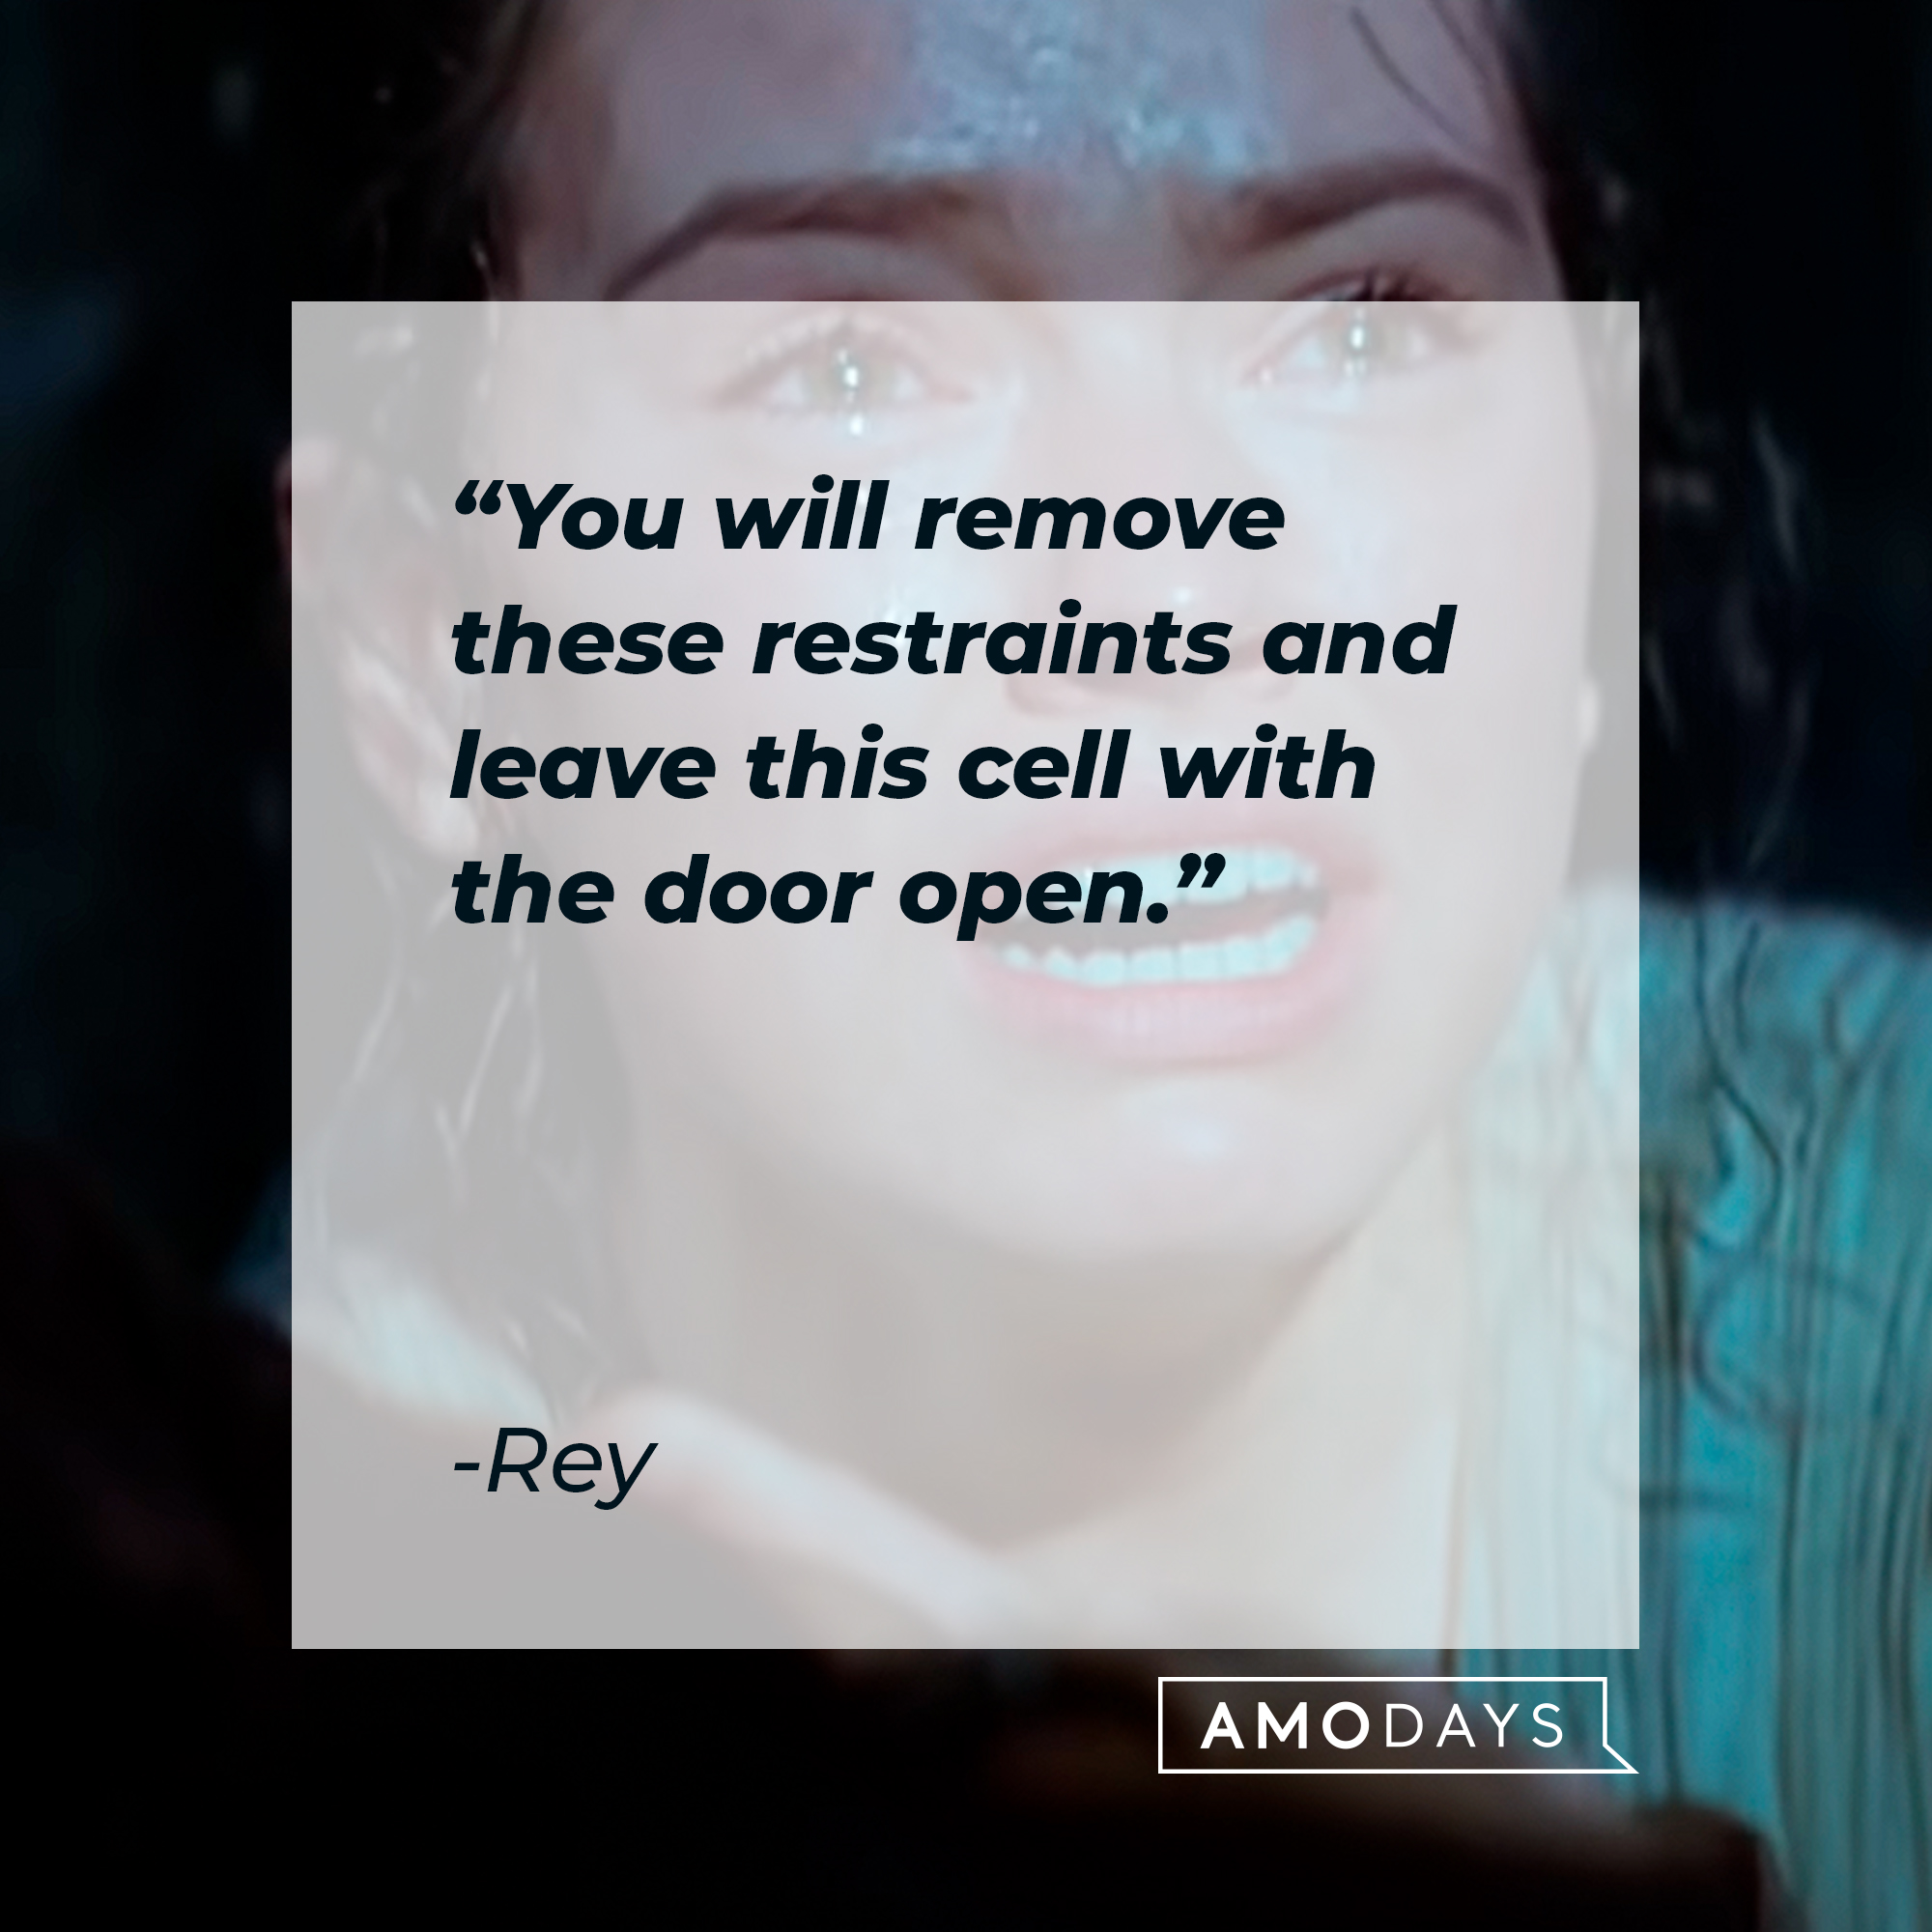 Rey's quote: "You will remove these restraints and leave this cell with the door open."┃Source: youtube.com/StarWars